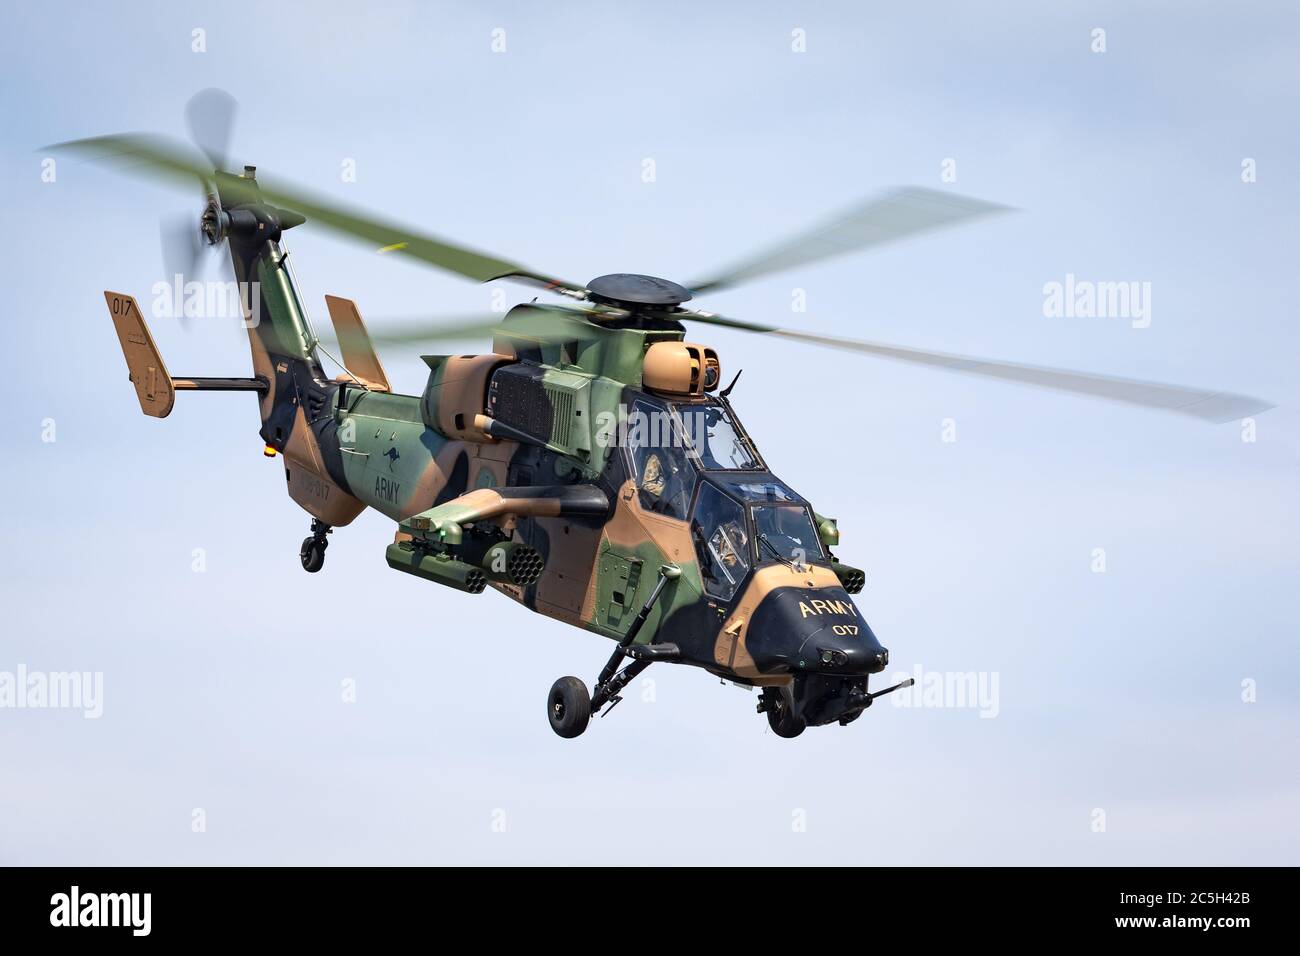 Australian Army Eurocopter Tiger ARH Armed reconnaissance helicopter. Stock Photo